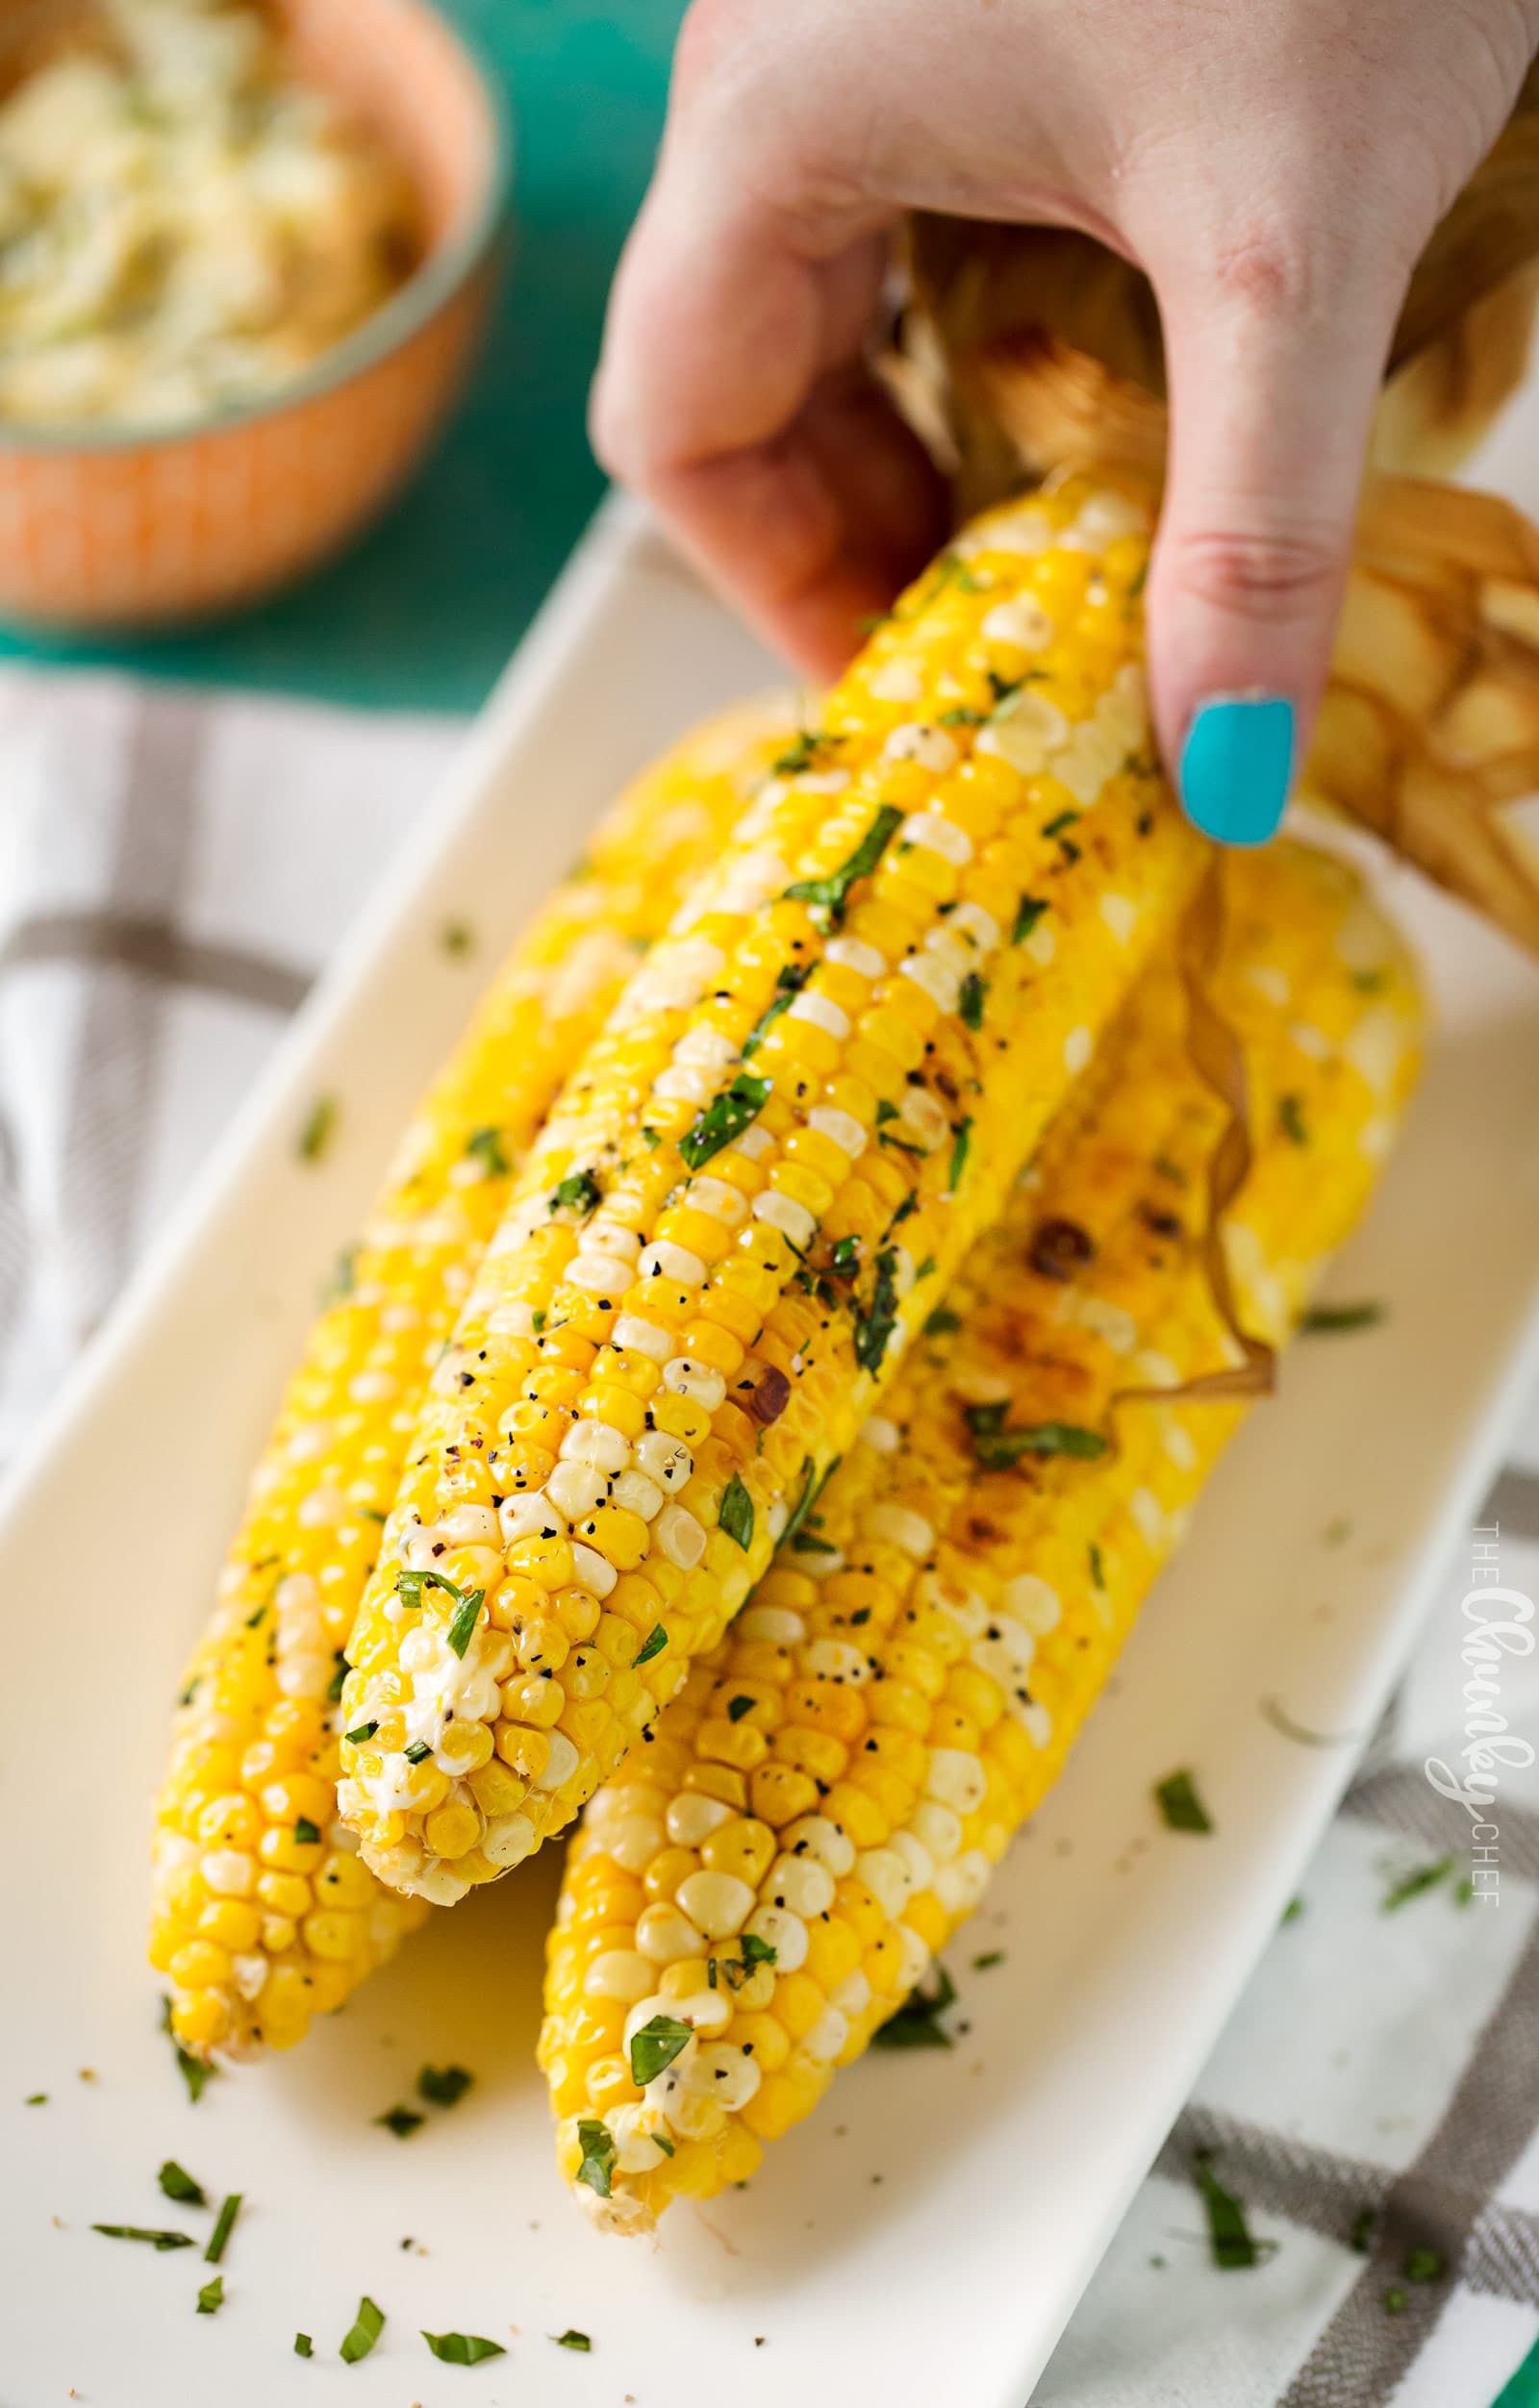 Oven Roasted Corn on the Cob | This foolproof method for cooking corn on the cob is easy, perfect for any kind of weather, and produces the juiciest, perfectly cooked ears of corn ever! | http://thechunkychef.com